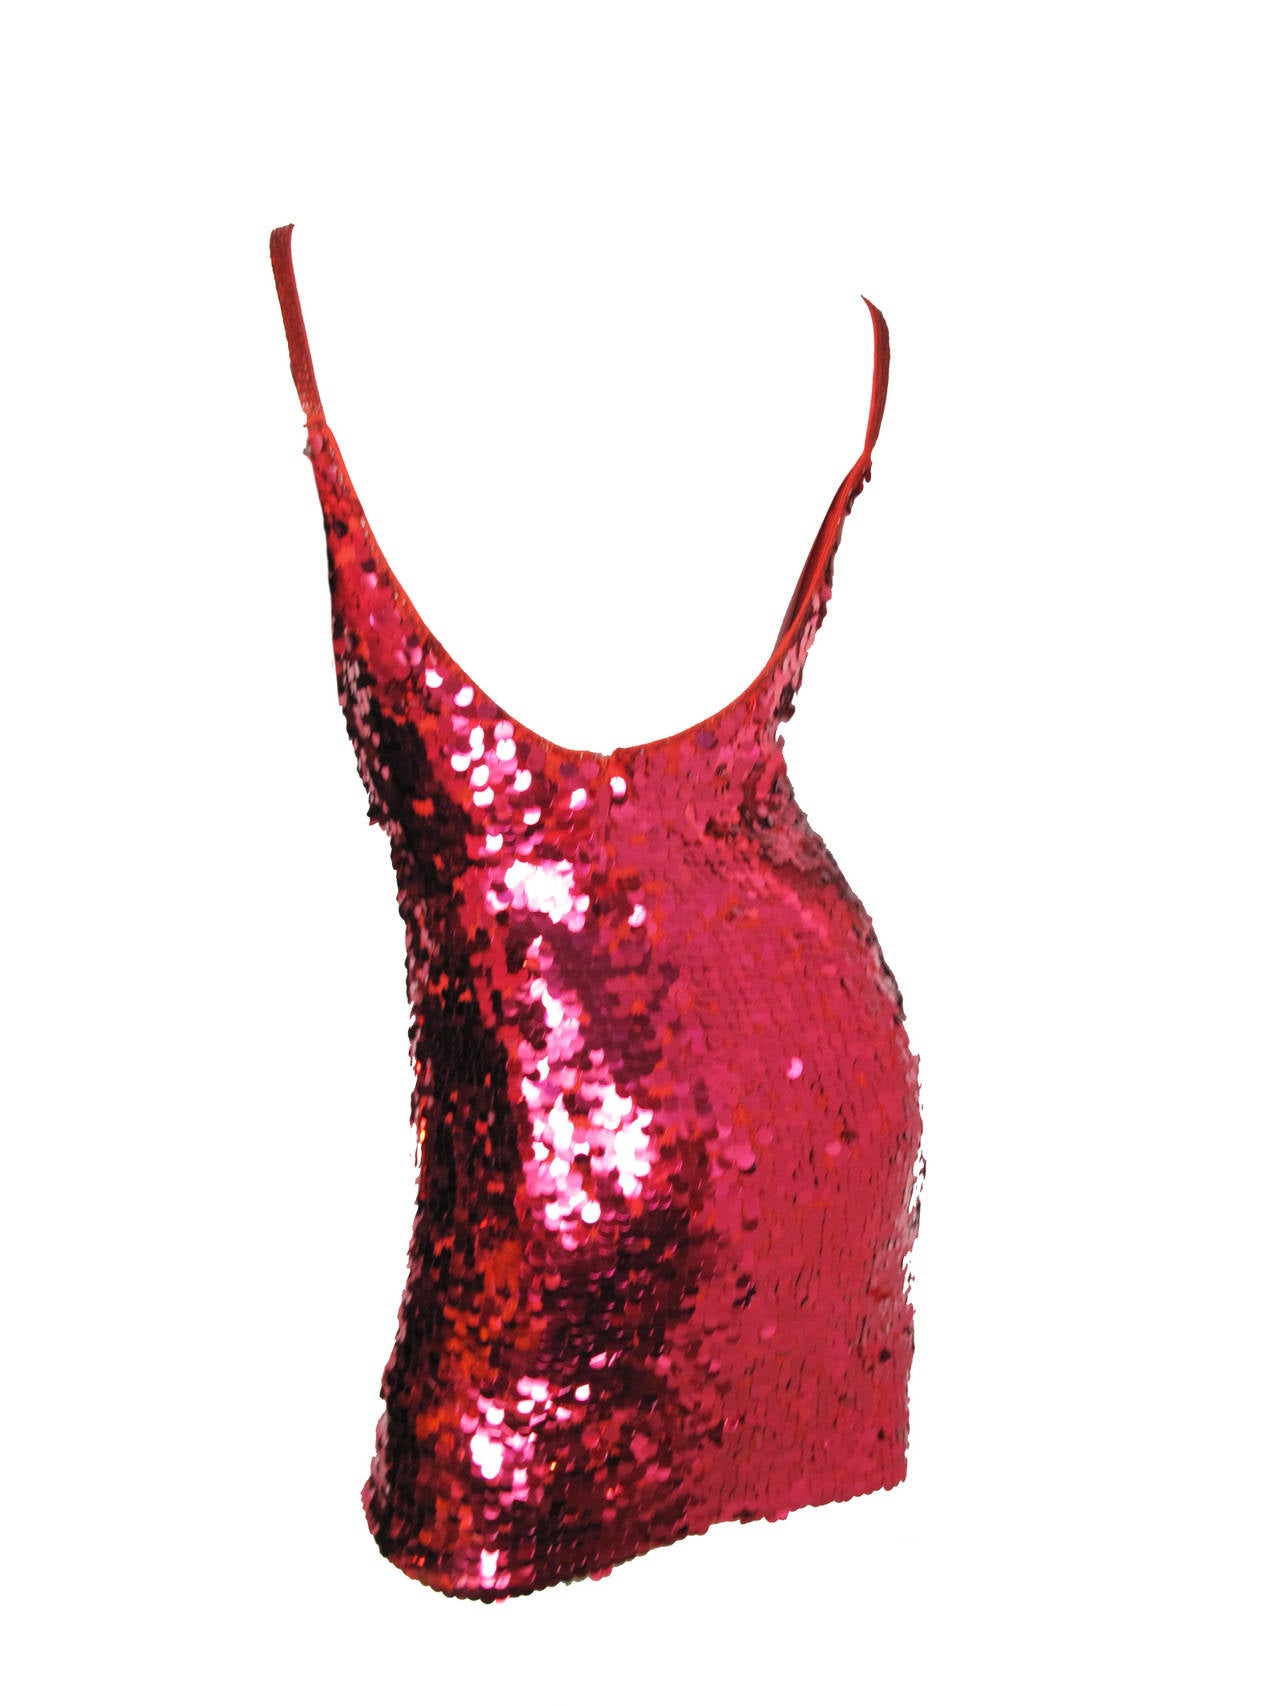 1980s Oleg Cassini red sequin cocktail dress.  Condition: Good, some sequins missing and some have been bent ) 
Size 4